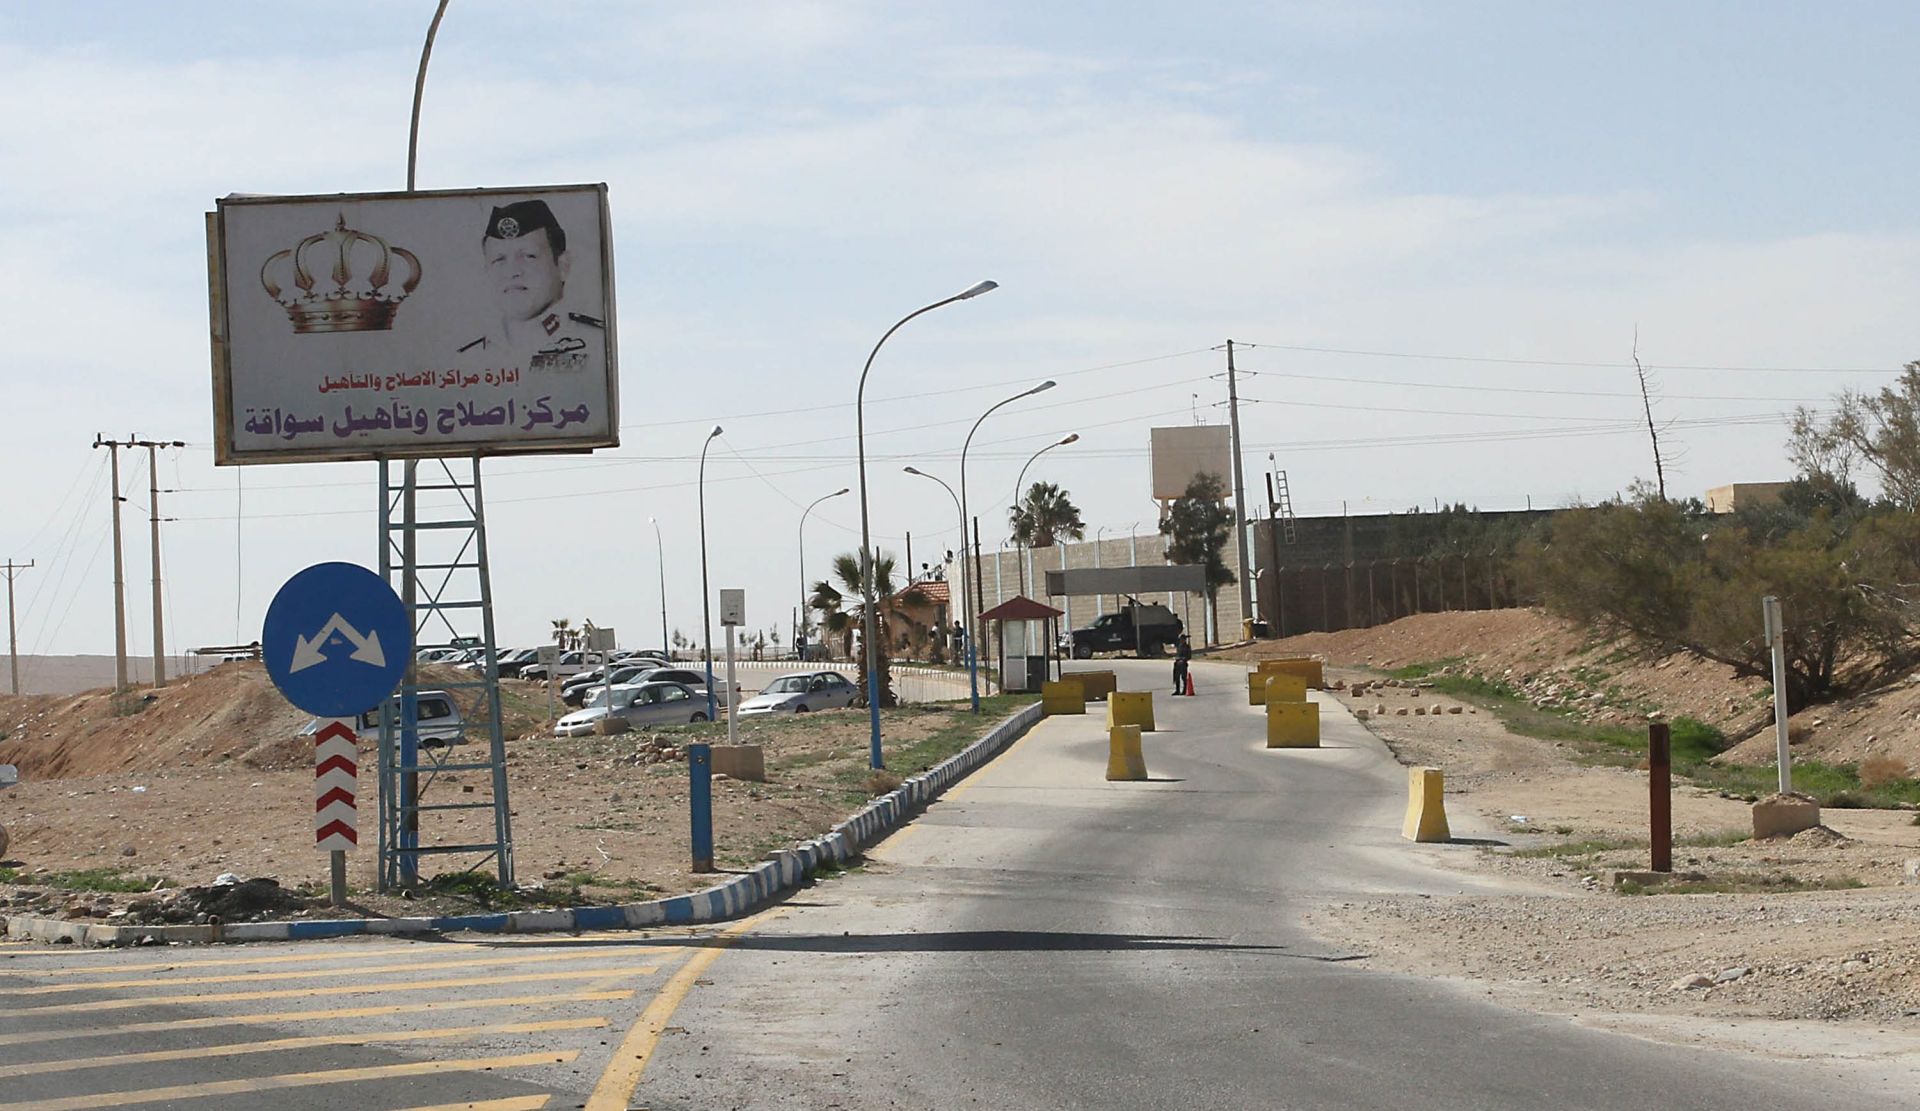 epa05828557 (FILE) - A file picture dated 04 February 2015, shows the entrance to the Jordanian Swaqa Prison, south of Amman. Jordan authorities announced it executed 15 convicts, including 10 terrorists on 04 March 2017. The Jordanian Minister of State for Media Affairs, Mohammed Momani, who is also the government spokesperson said that 10 terrorists were executed after they were convicted of crimes including what is known as Irbid terror cell", and the terror attack against the General Intelligence Department office in Bakaa refugee camp. Some of those executed were convicted of other crimes including the attack on public security personnel near Irbid's Samma town, the assassination of columnist Nahed Hattar, terror bomb attack on Jordan's Embassy in Baghdad in 2003, and the terrorist attack against foreign tourists visiting the Roman amphitheater in Amman. The minister also said that another five criminals, who committed major criminal offenses and incest, were also executed. The executions were carried out at Swaqa Correctional and Rehabilitation Centre (SCRC), some 70 kilometers south of Amman.  EPA/JAMAL NASRALLAH